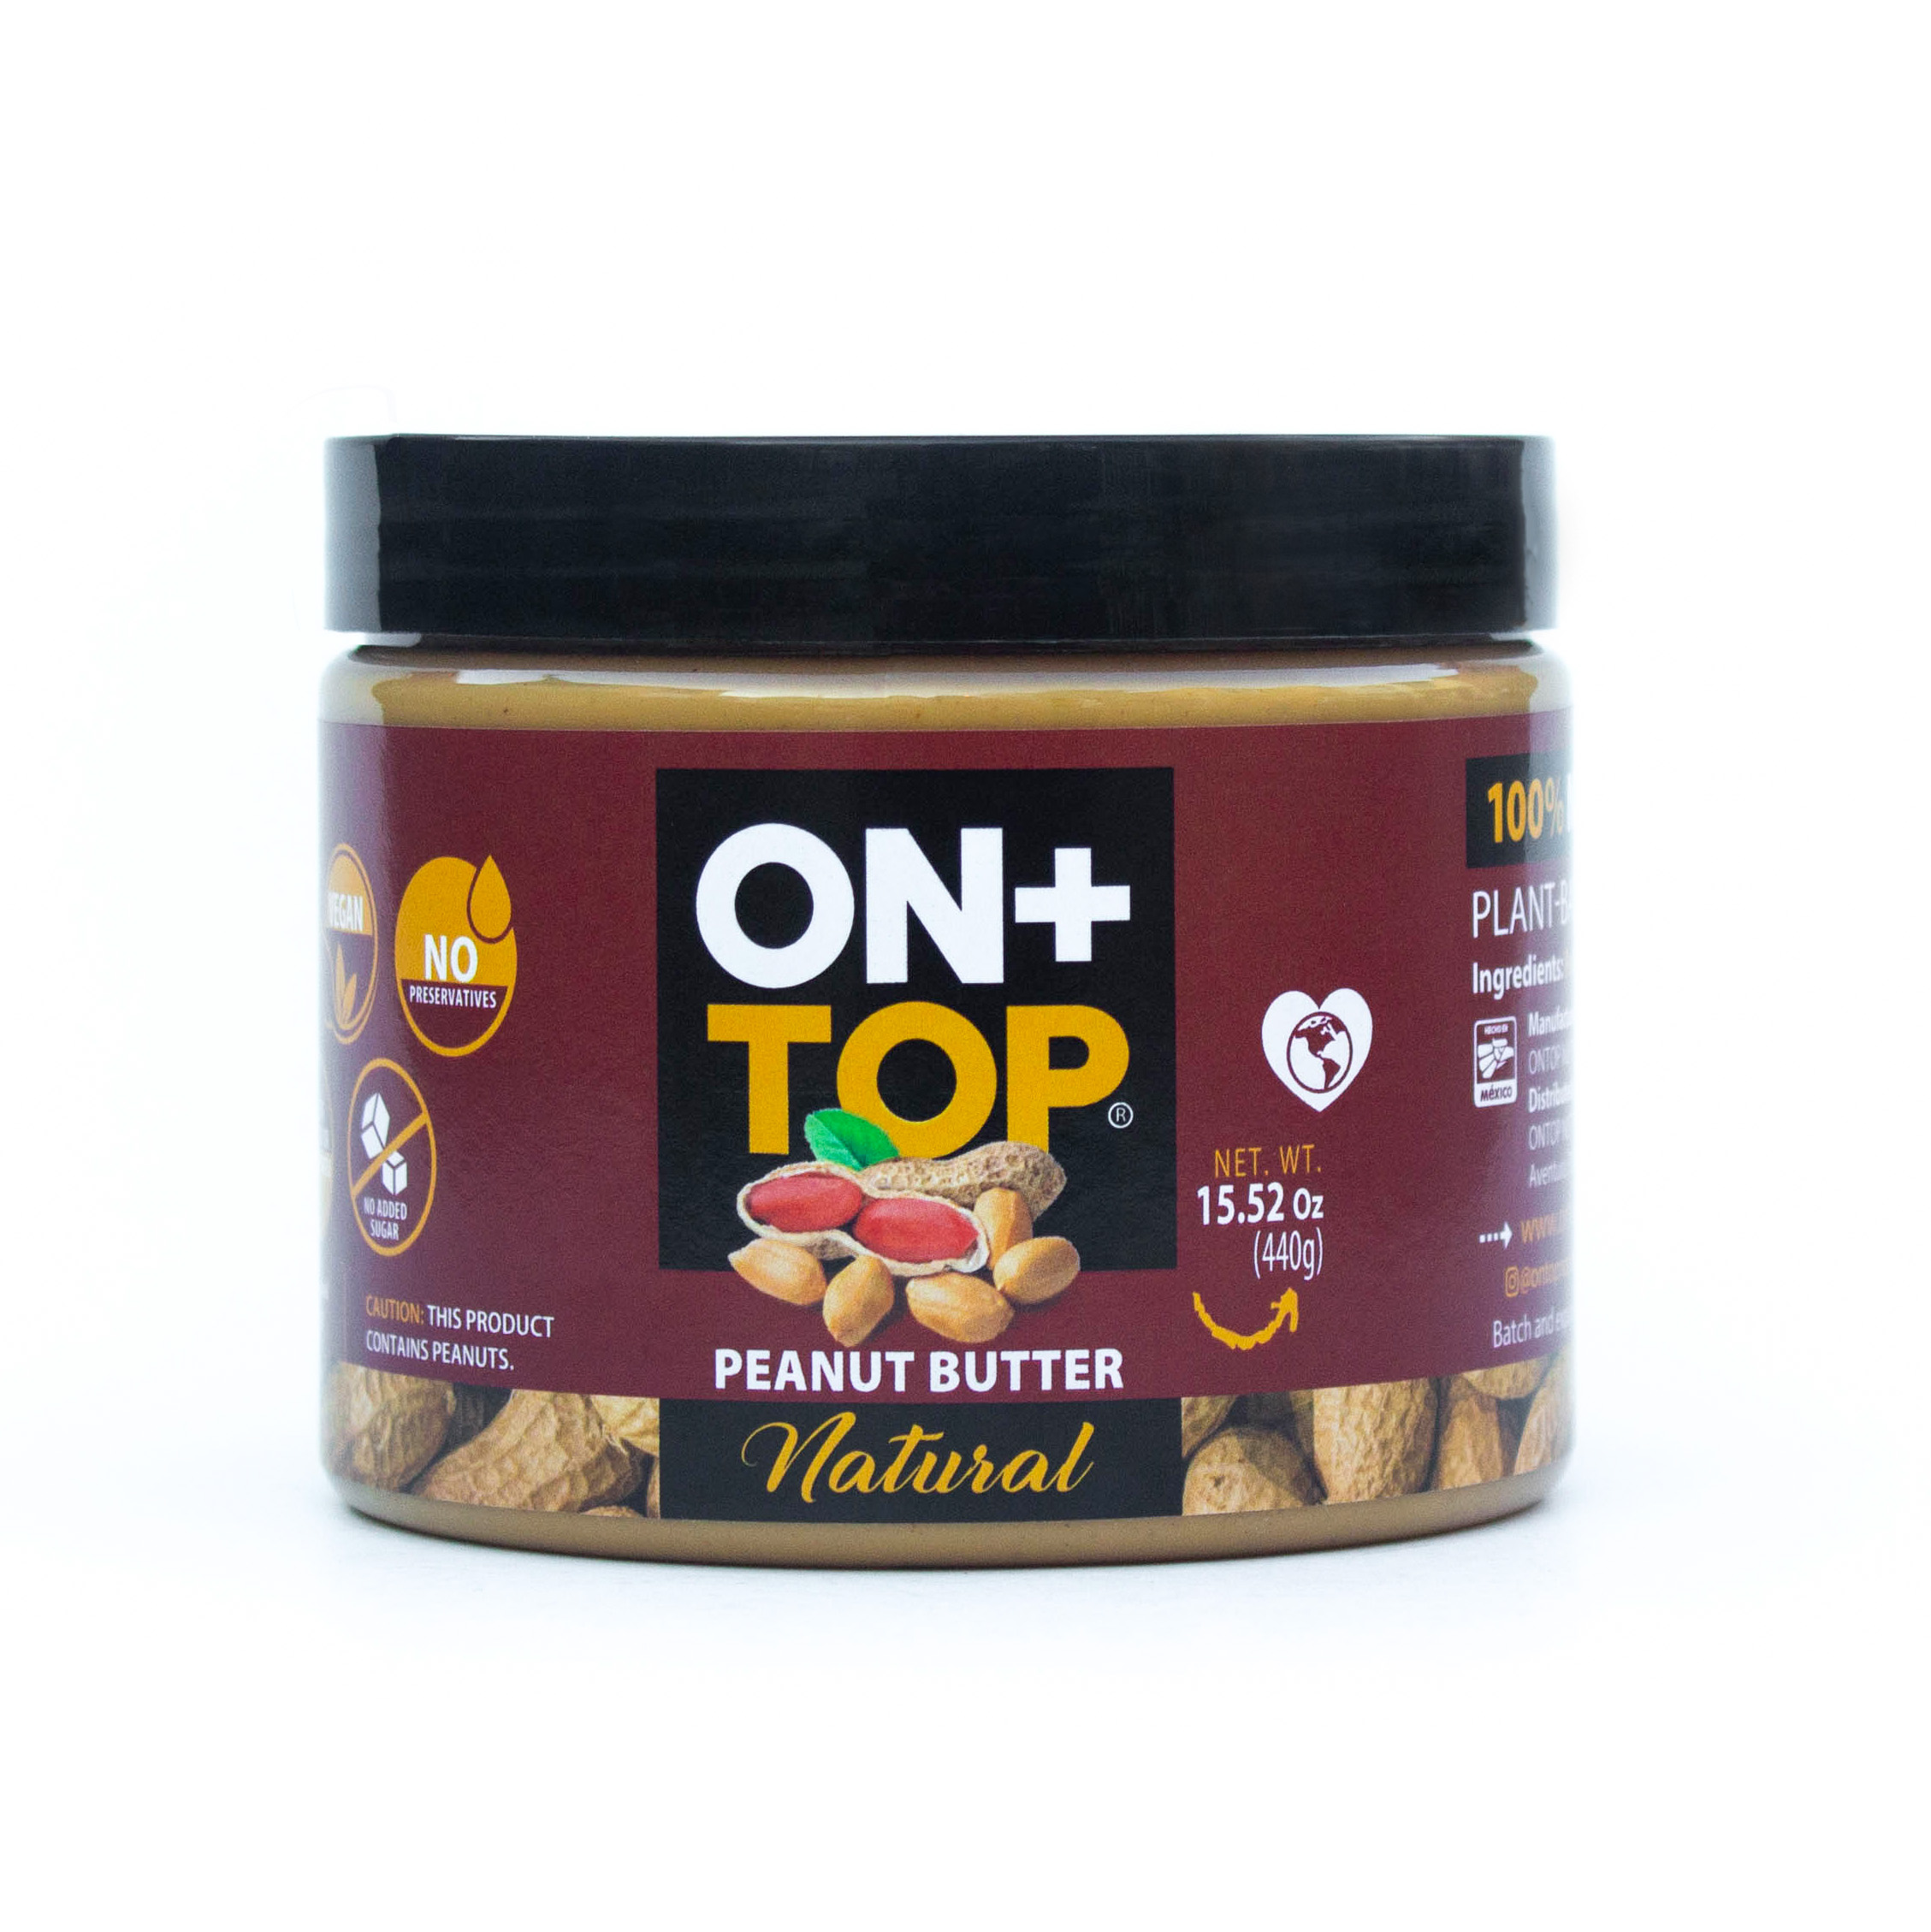 ON+TOP  Peanut Butter Natural  6 units per case 440 g